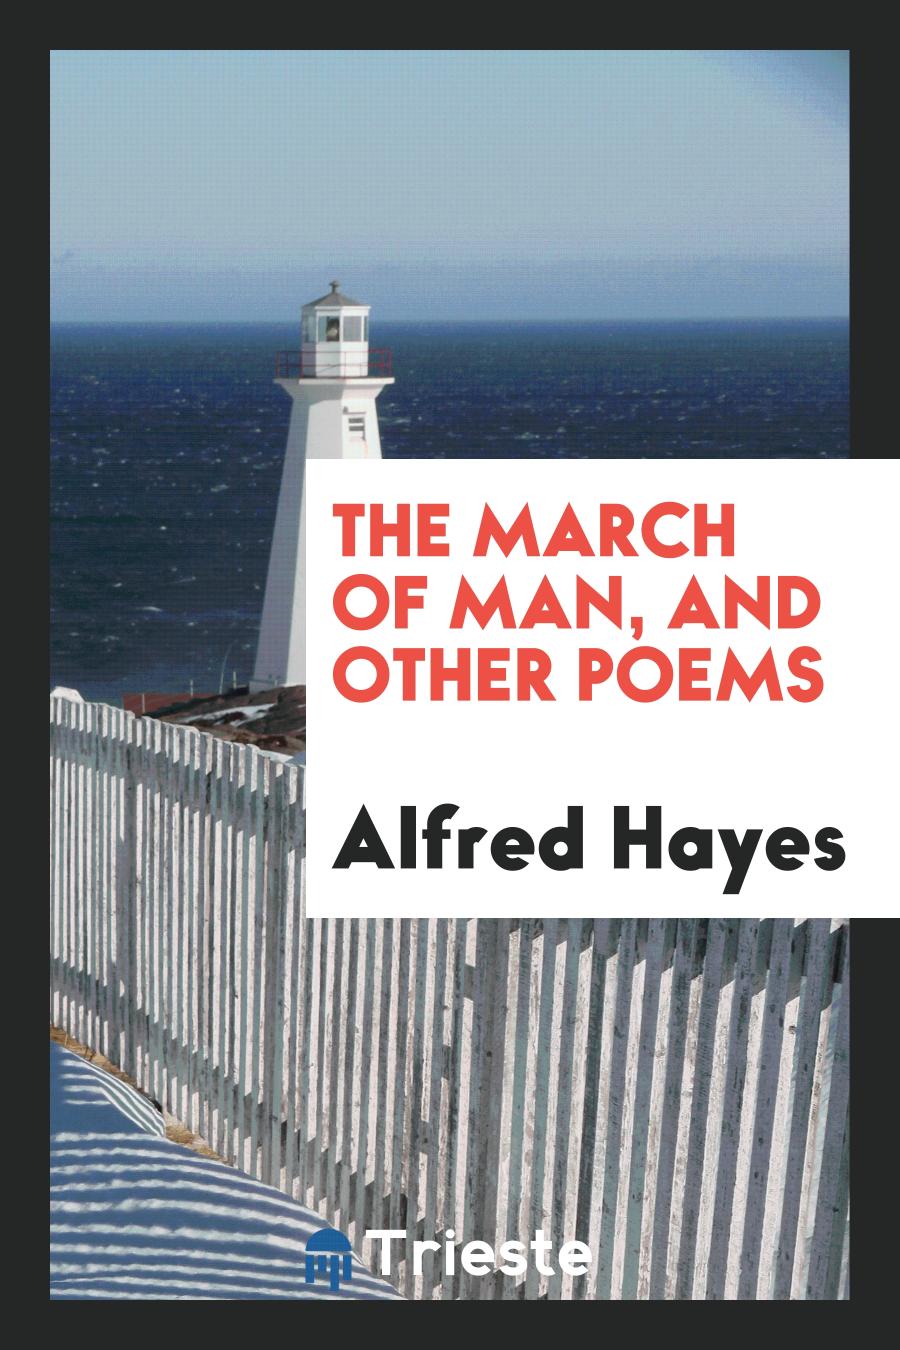 The March of Man, and Other Poems